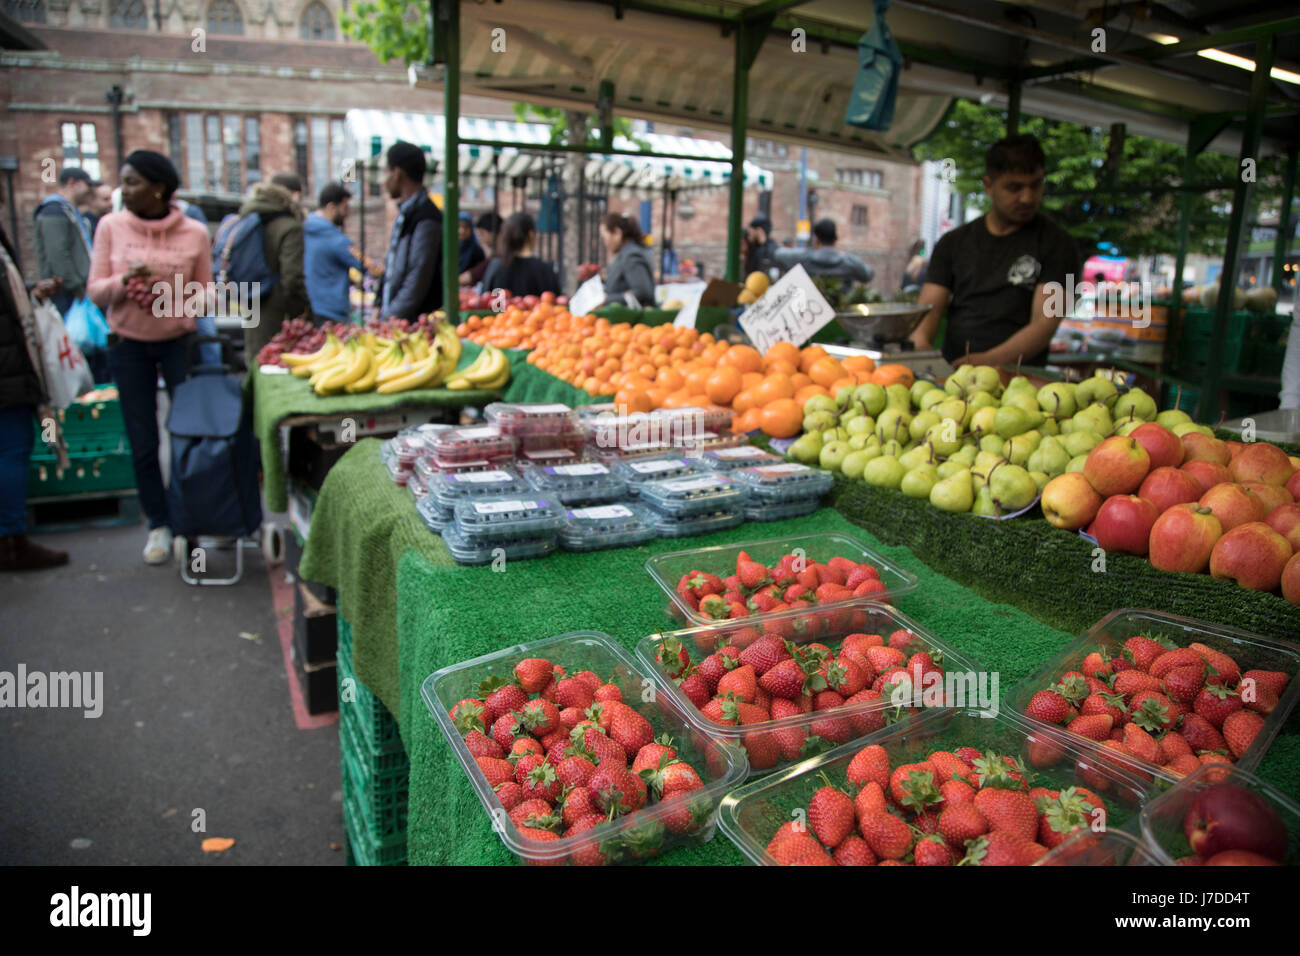 Multicultural scene at the Bullring Open Market, an outdoor food market in central Birmingham, United Kingdom. The Open Market offers a huge variety of fresh fruit and vegetables, fabrics, household items and seasonal goods. The Bull Ring Open Market has 130 stalls. Stock Photo